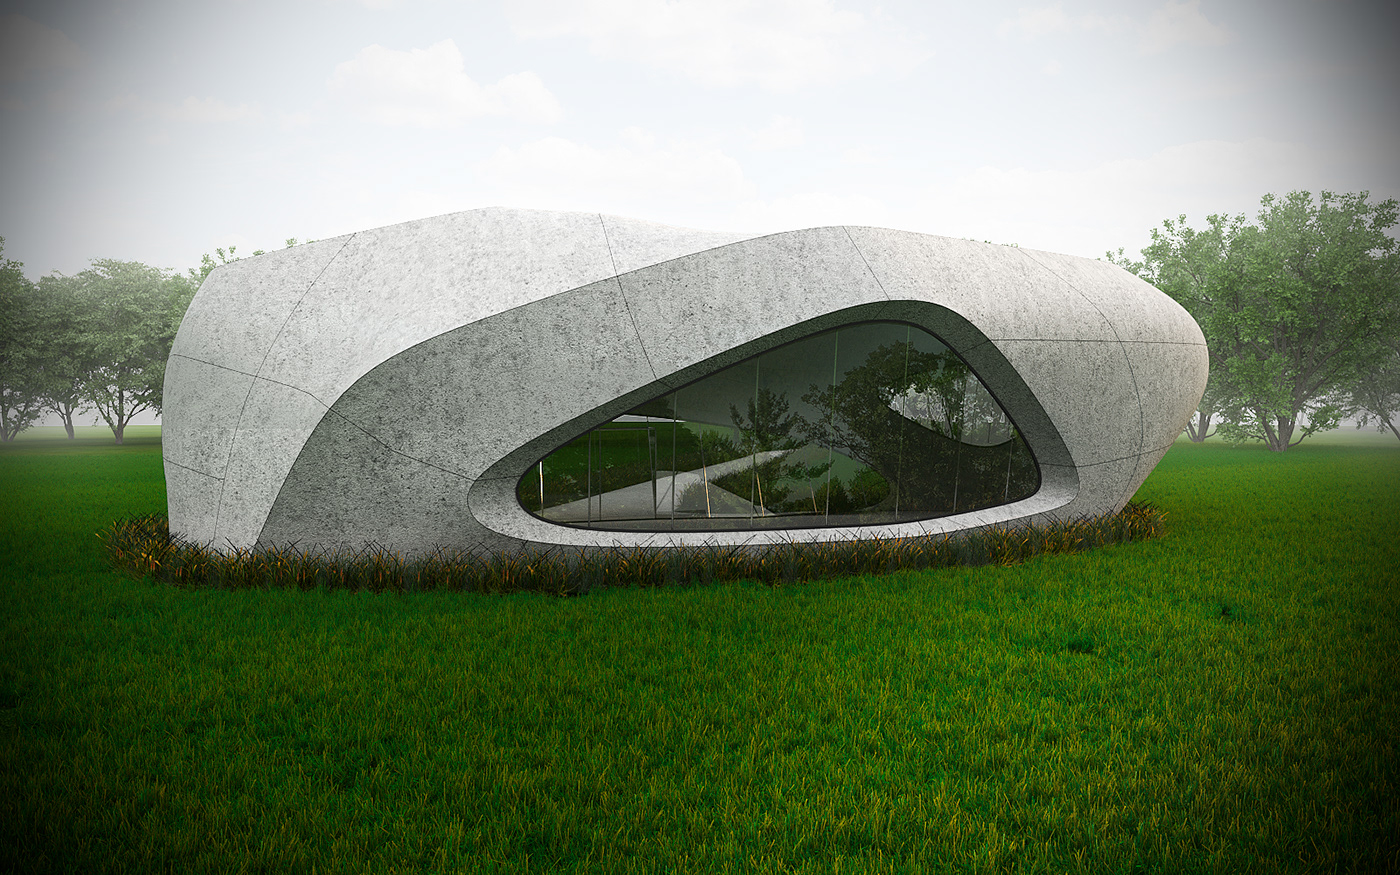 3d printed 3d printed house architecture contemporary design medern house parametric architecture